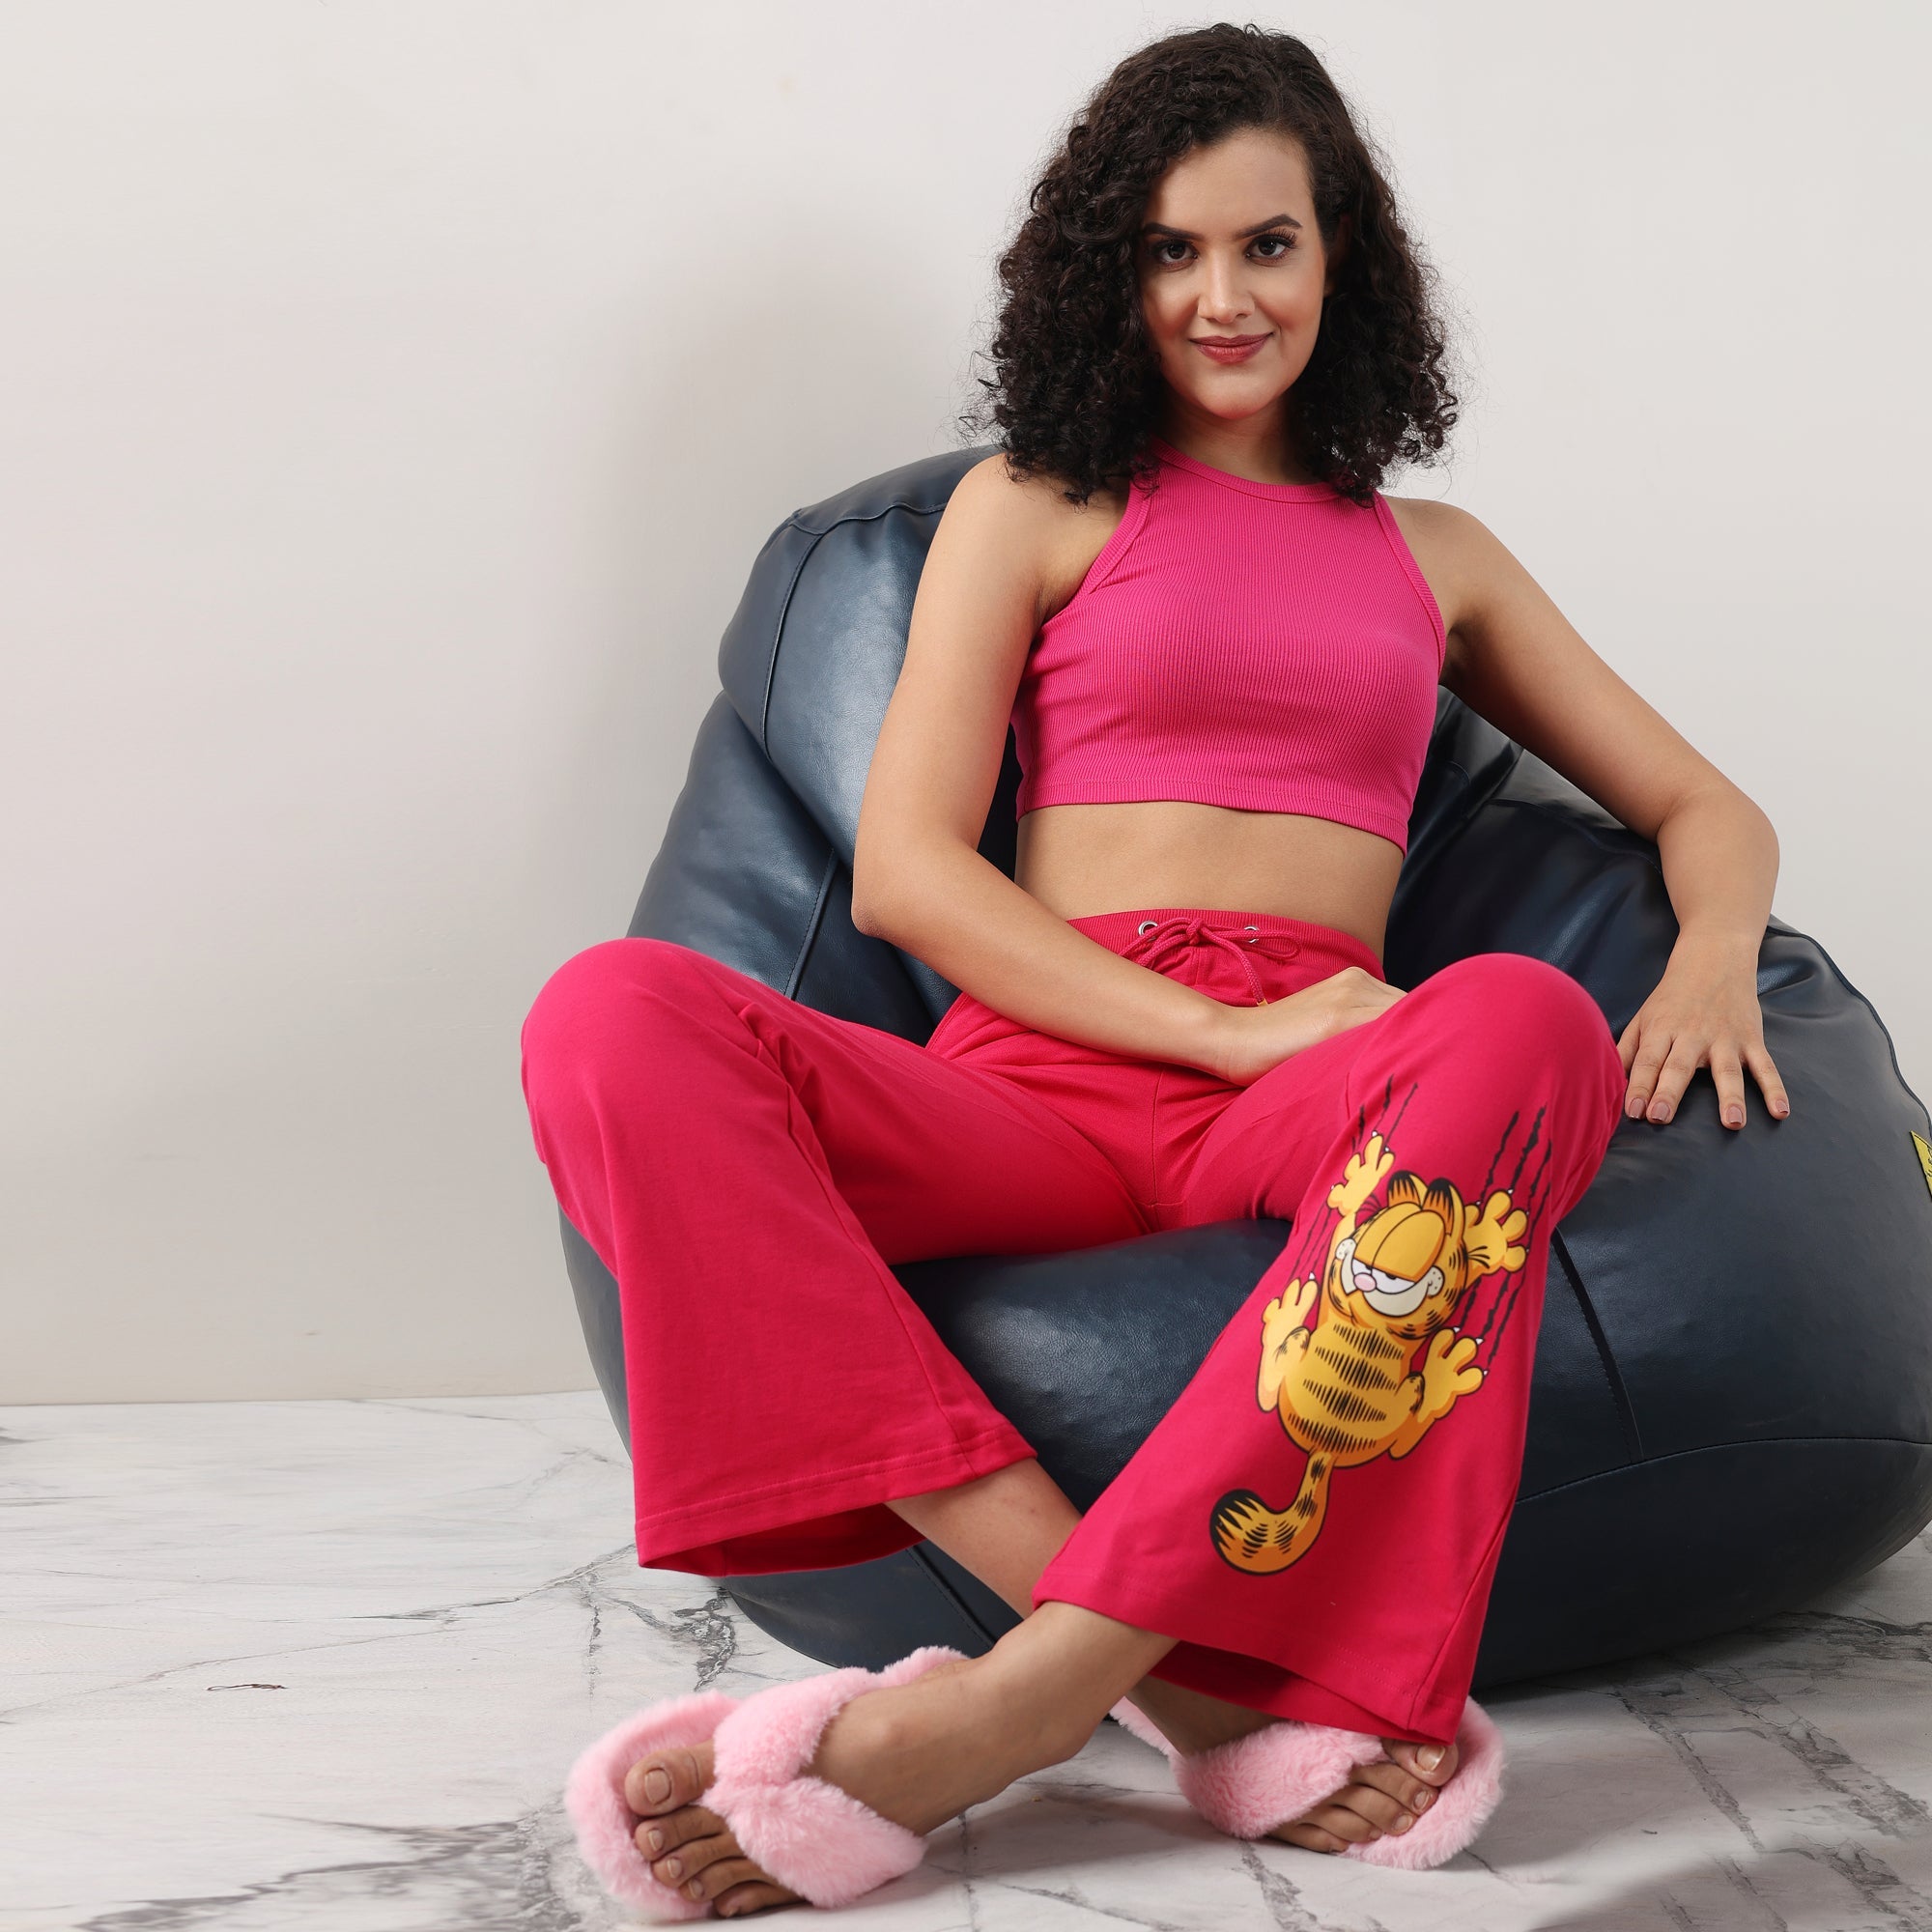 Evolove launches world's softest and most comfortable pajamas in Its  #IntoTheFuture edit of sleepwear